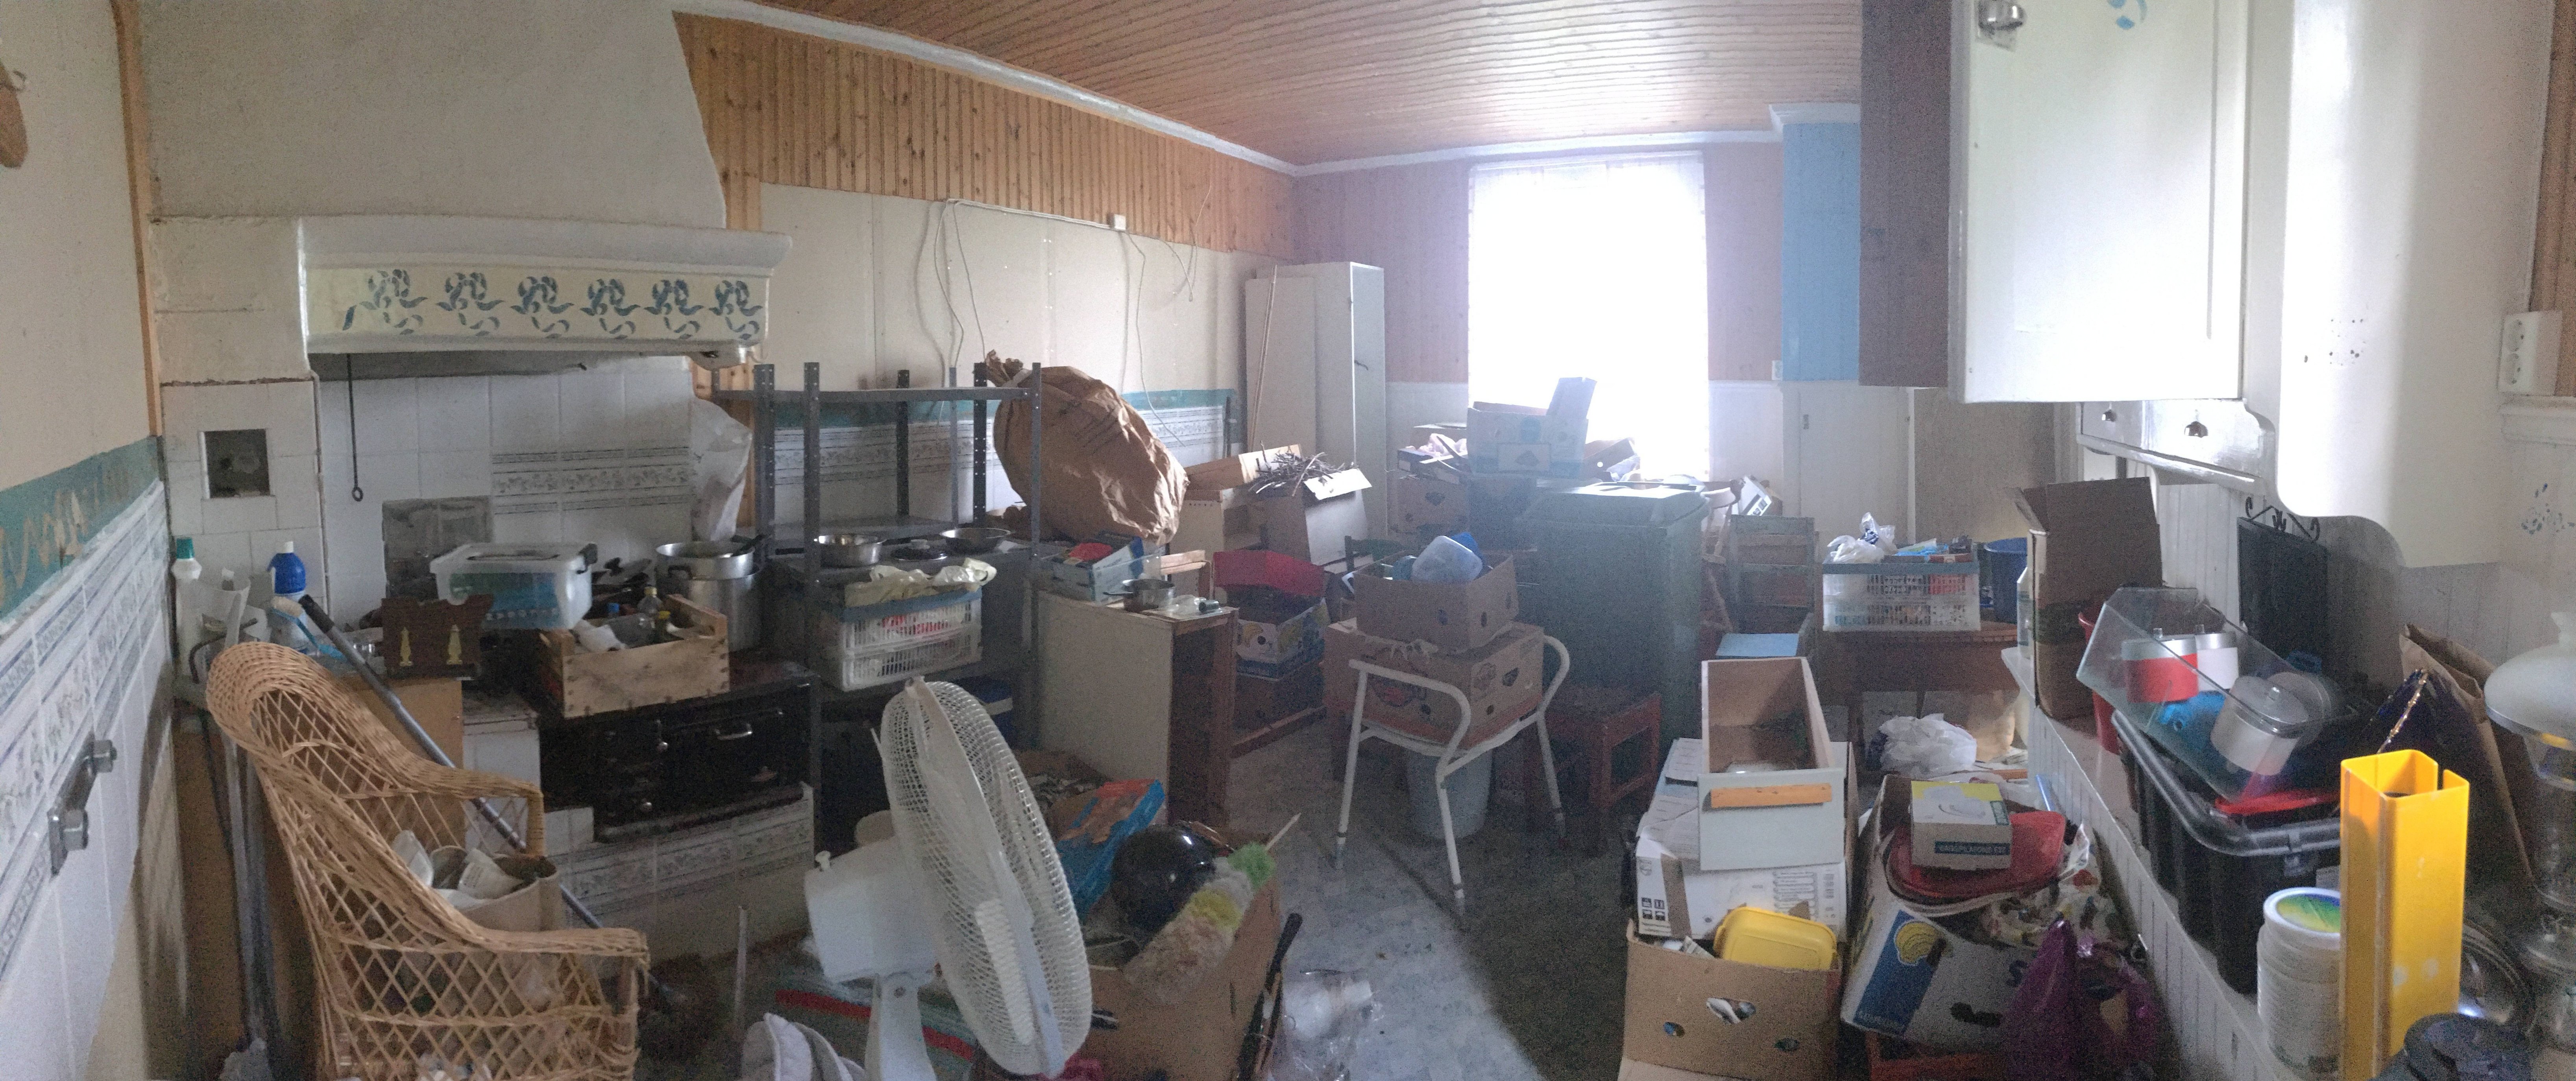 The house was literally full of things (no values, sorry guys), it looked like someone had moved a bunch of moving boxes and just dumped them out in every. single. room. Pots, news papers, kitchen utensils, clothes, more pots, bags of cement, planks, and old bike, more pots, old people's decoration figurines etc.